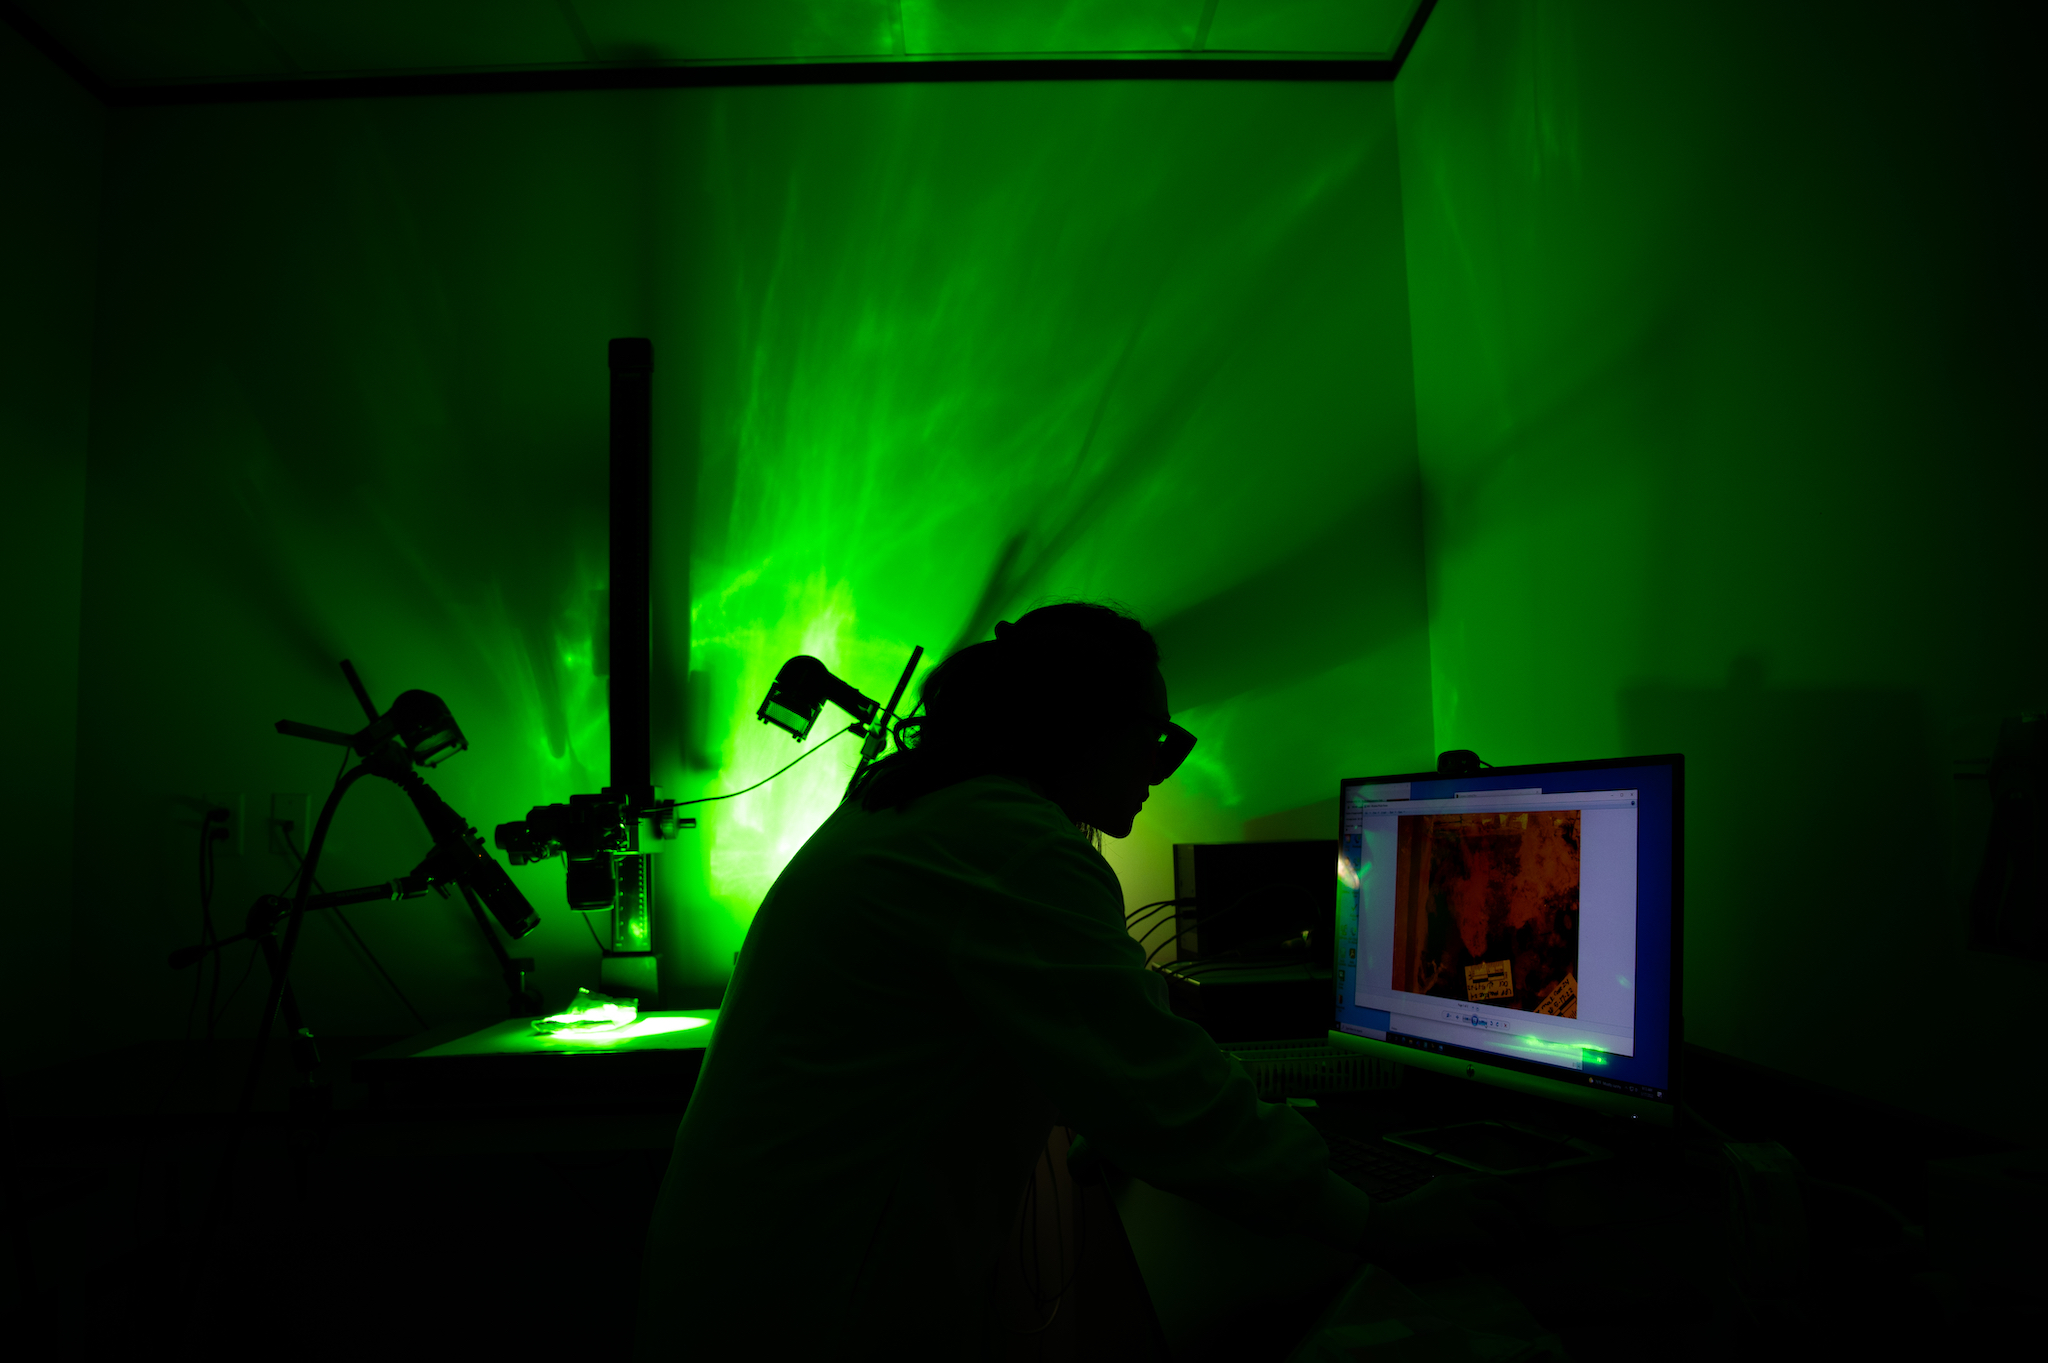 In a darkened room at Houston's crime lab, a forensic scientist is silhoutted against their equipment in the weird green glow it produces.